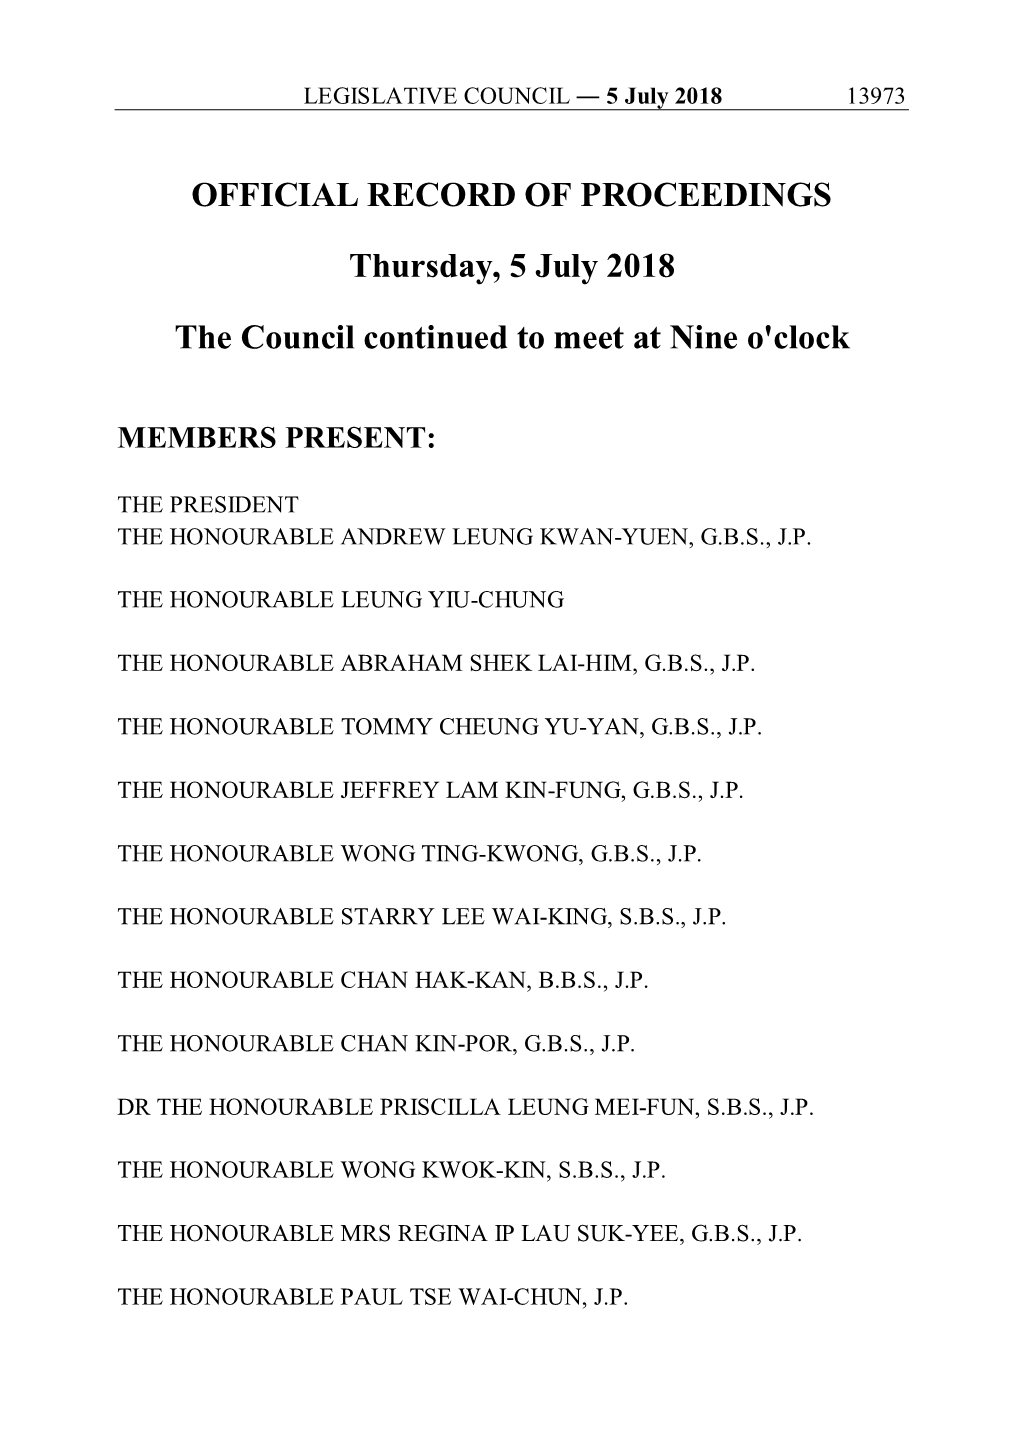 OFFICIAL RECORD of PROCEEDINGS Thursday, 5 July